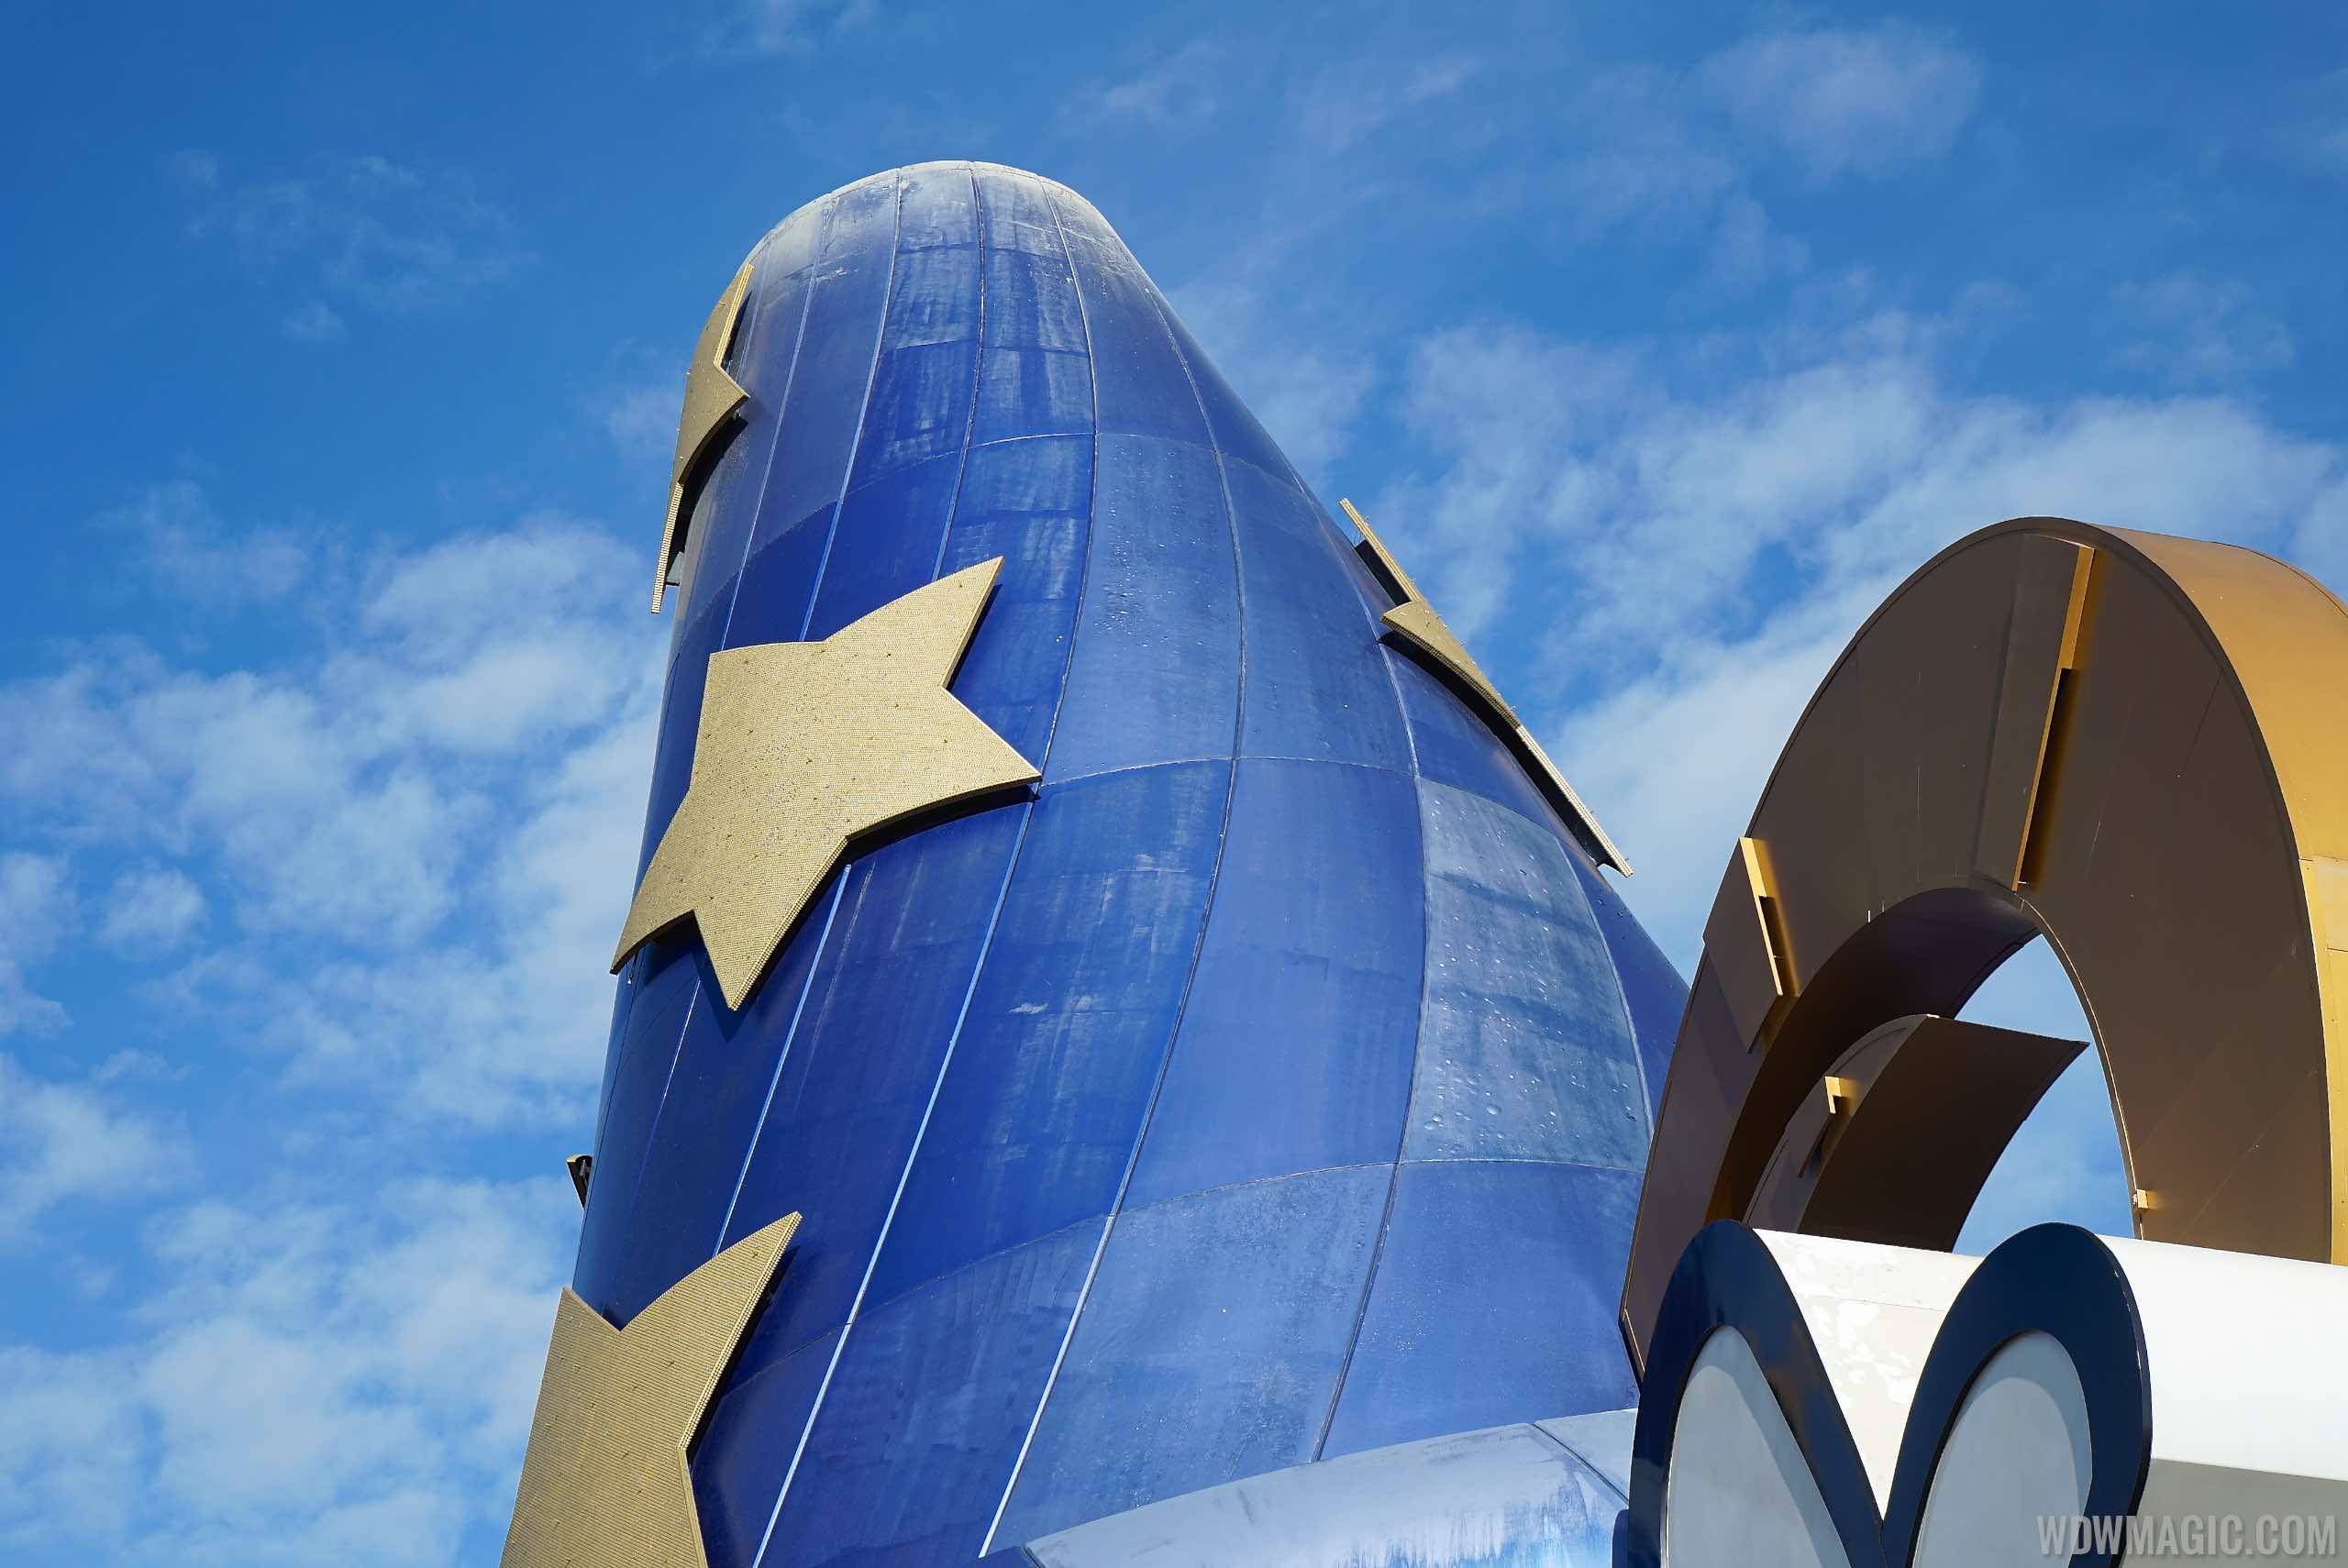 PHOTOS - First section of the Sorcerer Mickey Hat icon removed